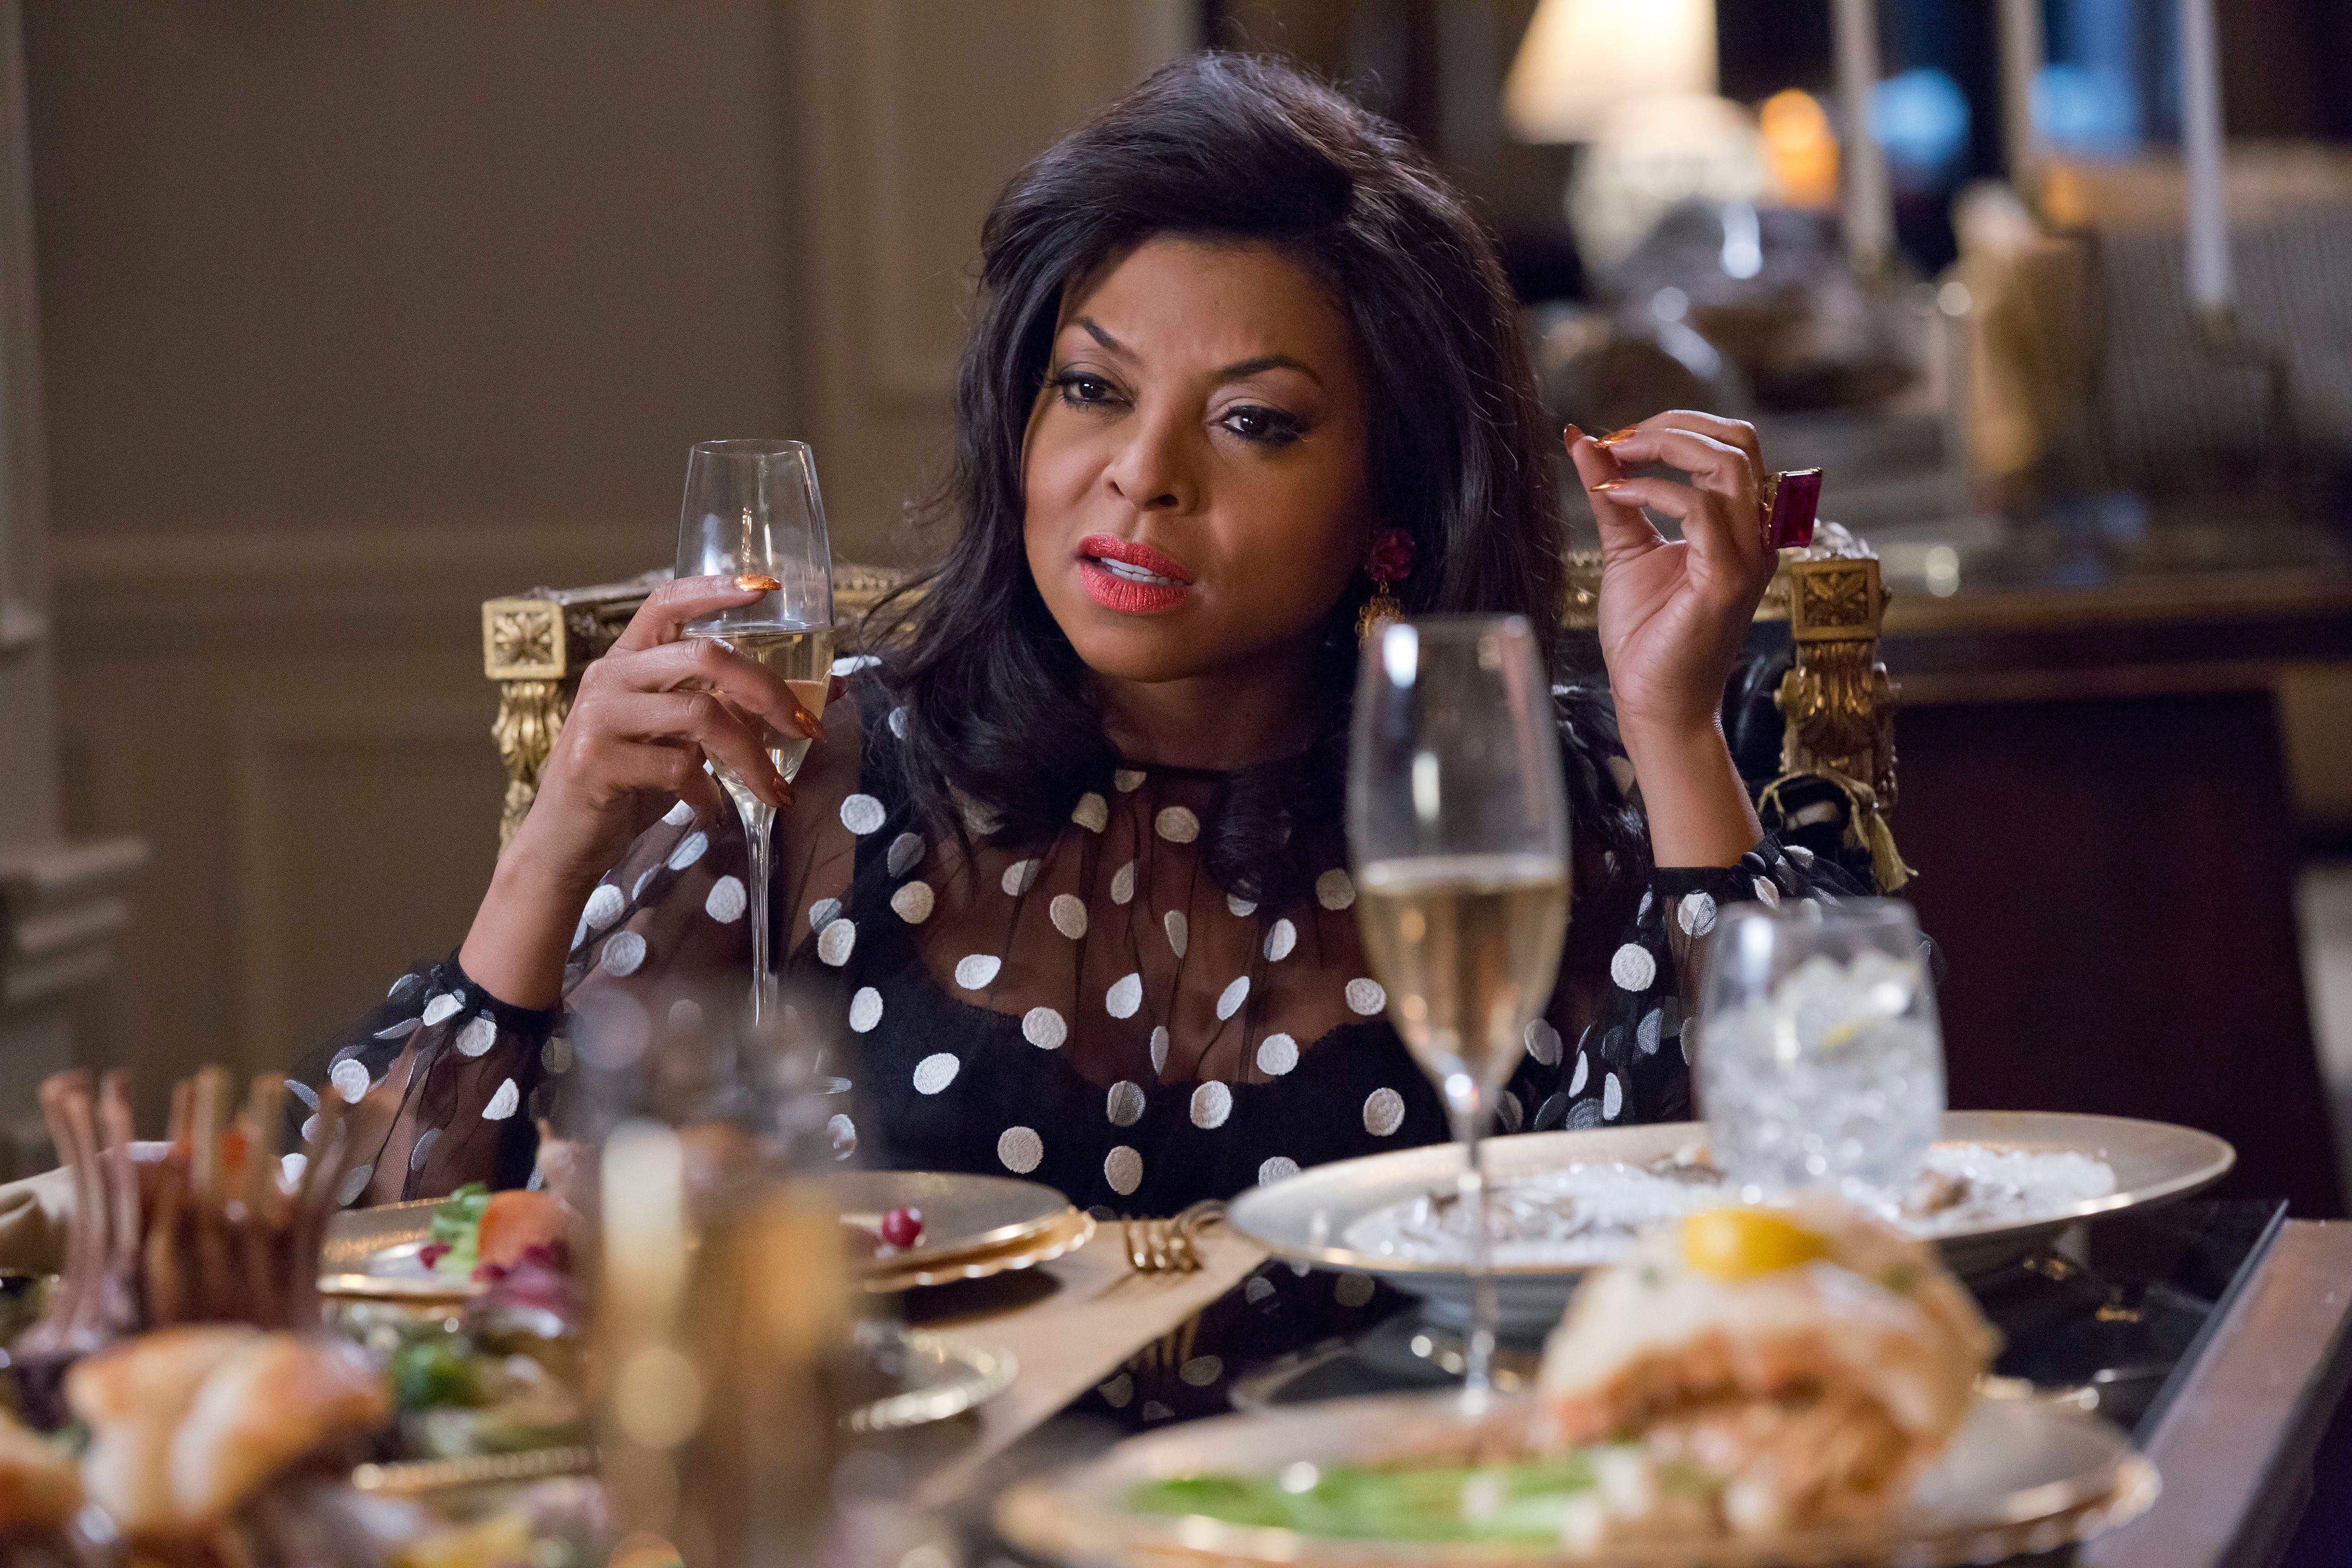 Cookie's Best Beauty Looks From Season 2 of 'Empire'
